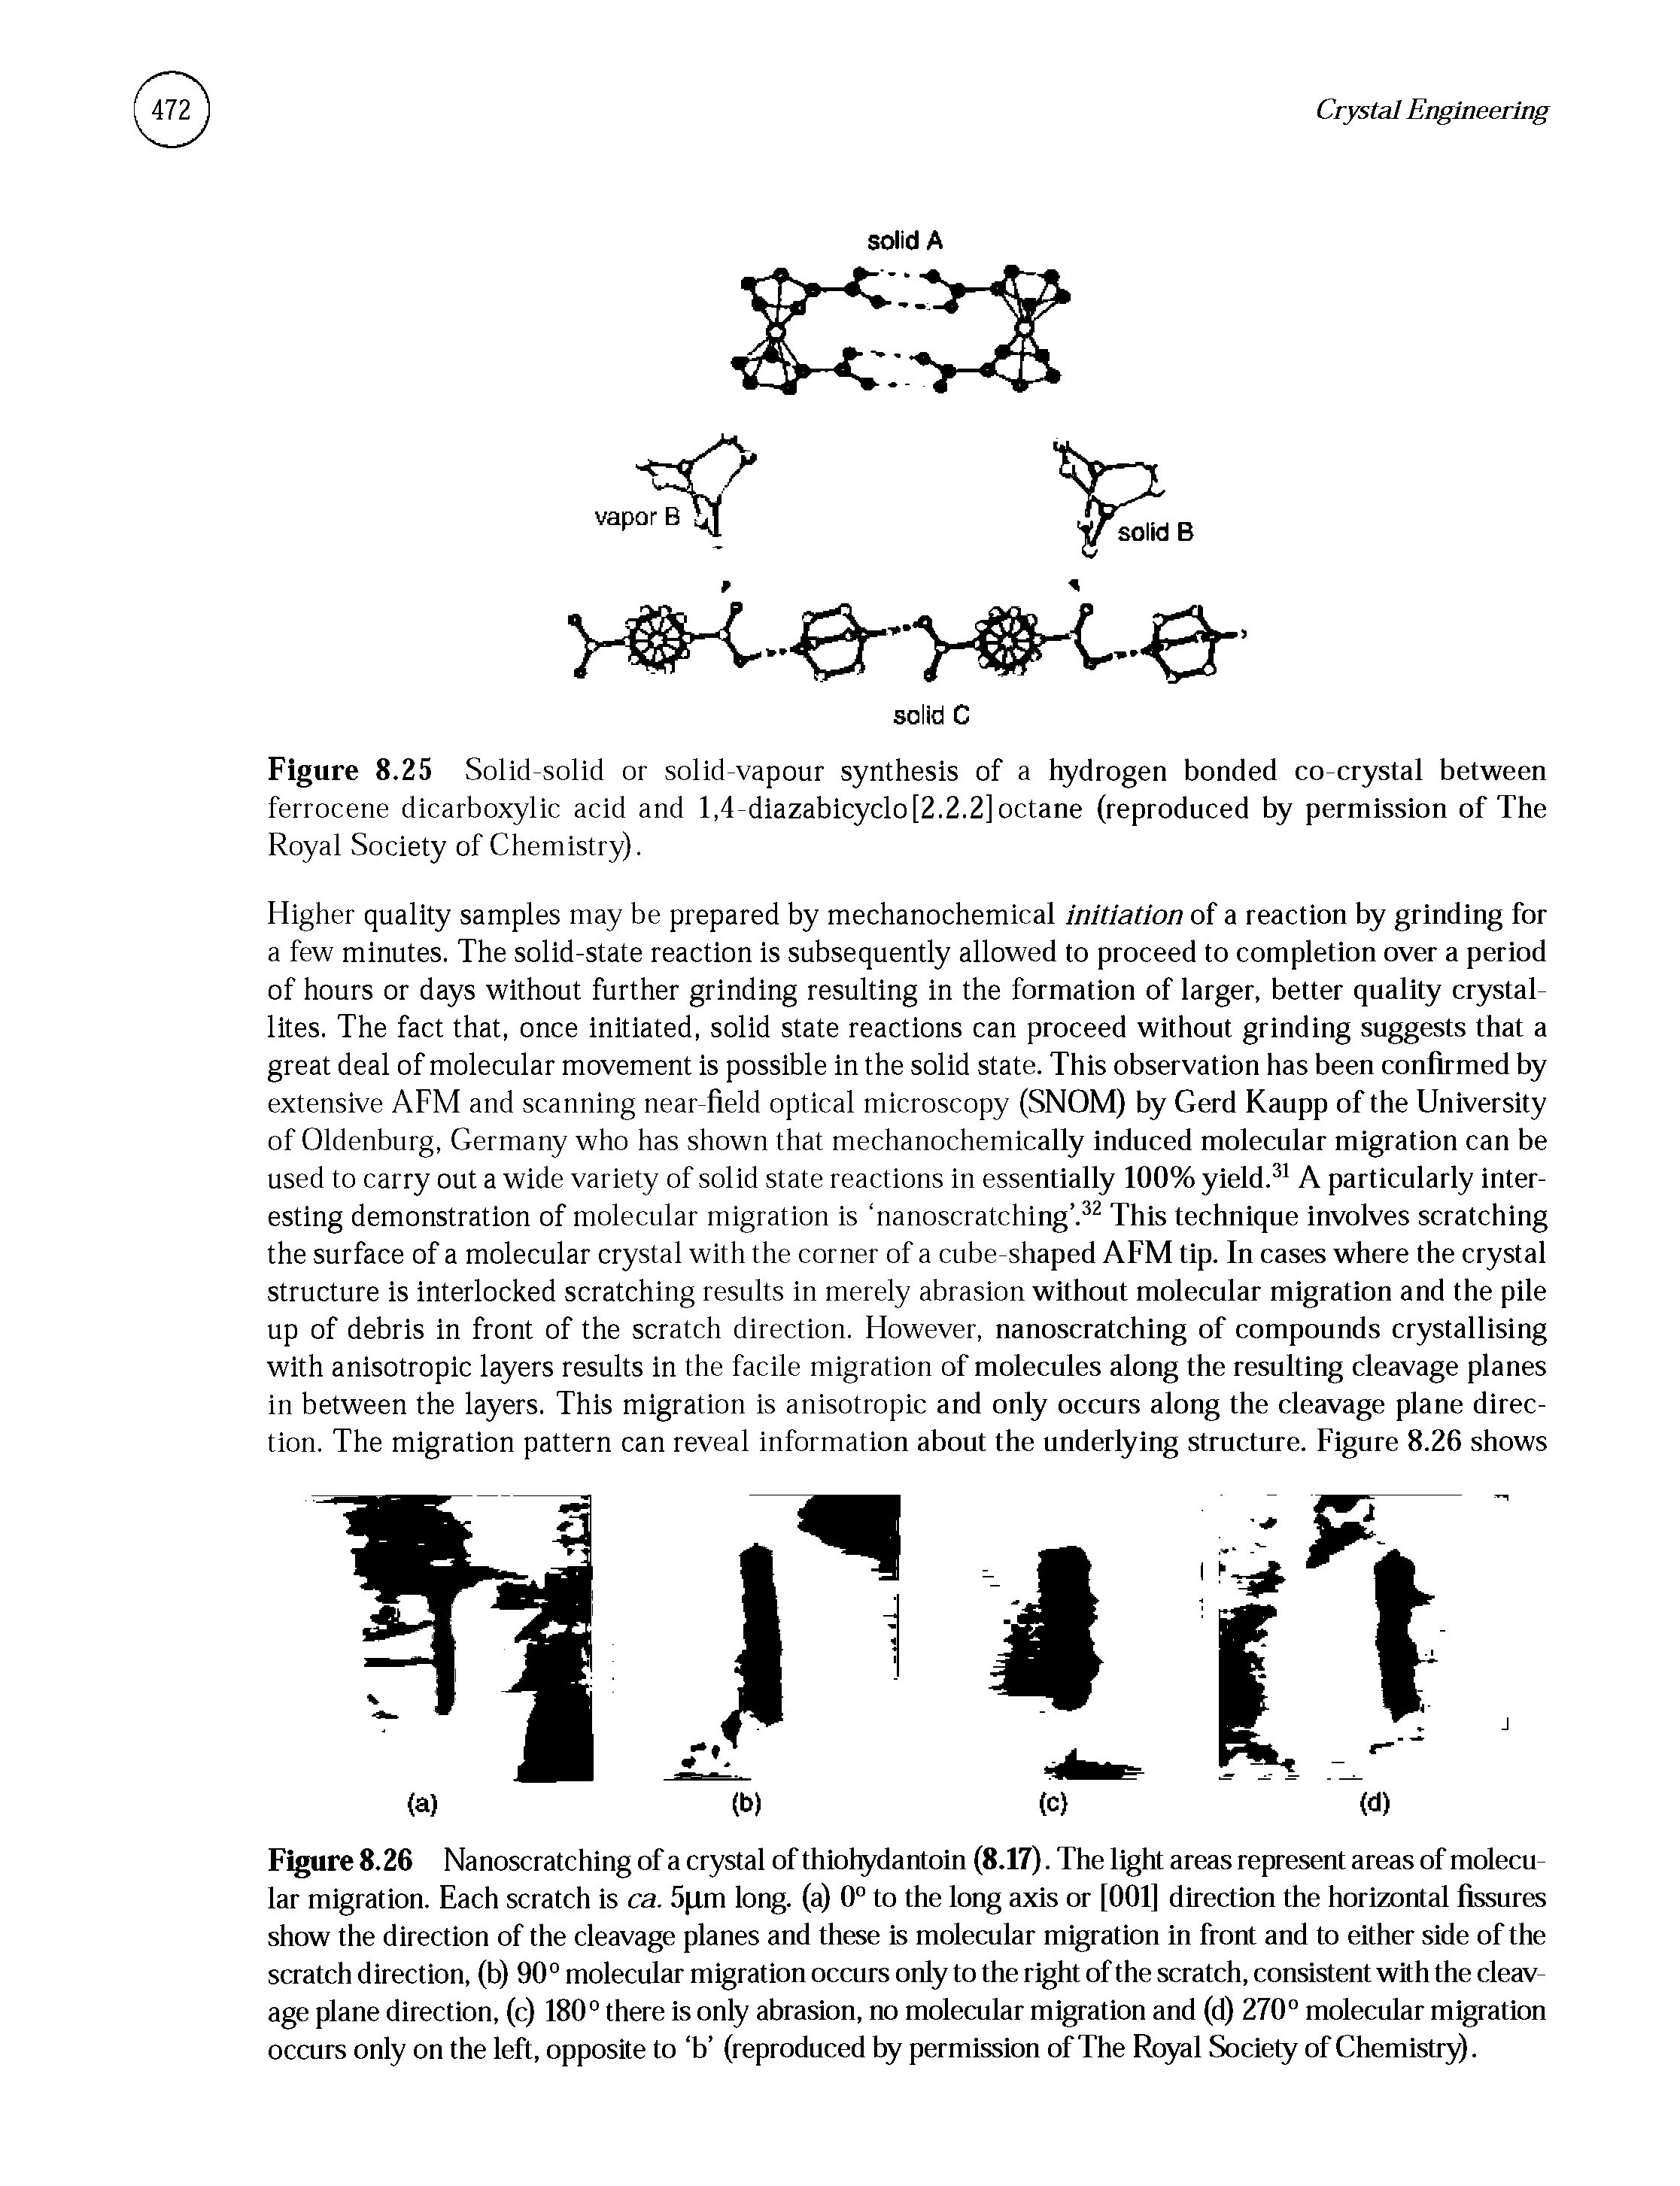 Figure 8.25 Solid-solid or solid-vapour synthesis of a hydrogen bonded co-crystal between ferrocene dicarboxylic acid and 1,4-diazabicyclo [2.2.2] octane (reproduced by permission of The Royal Society of Chemistry).